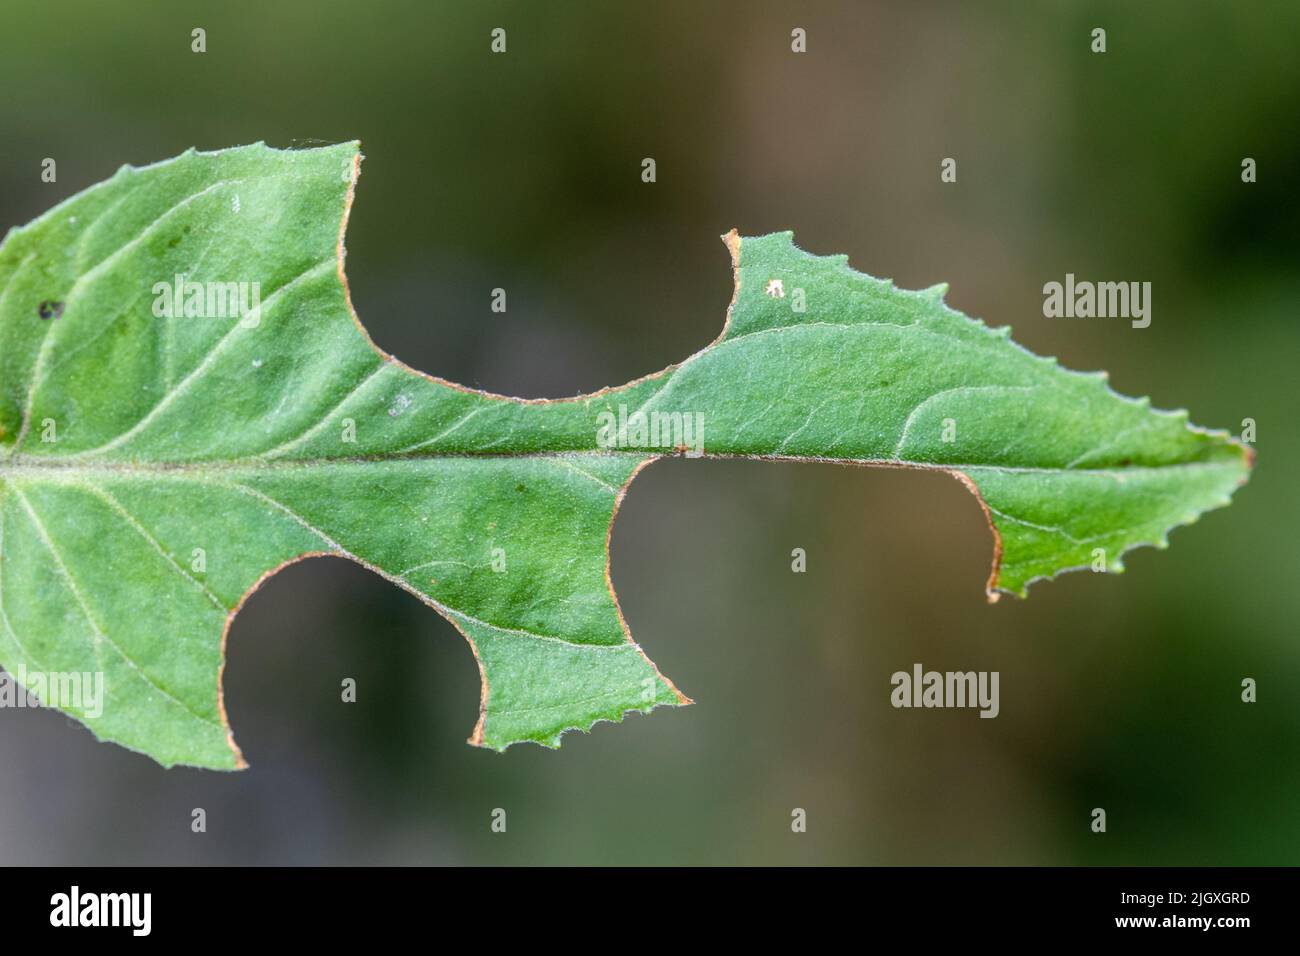 A green leaf (willowherb) with sections cut out by a leafcutter bee (leaf-cutter bee signs) during summer, England, UK Stock Photo